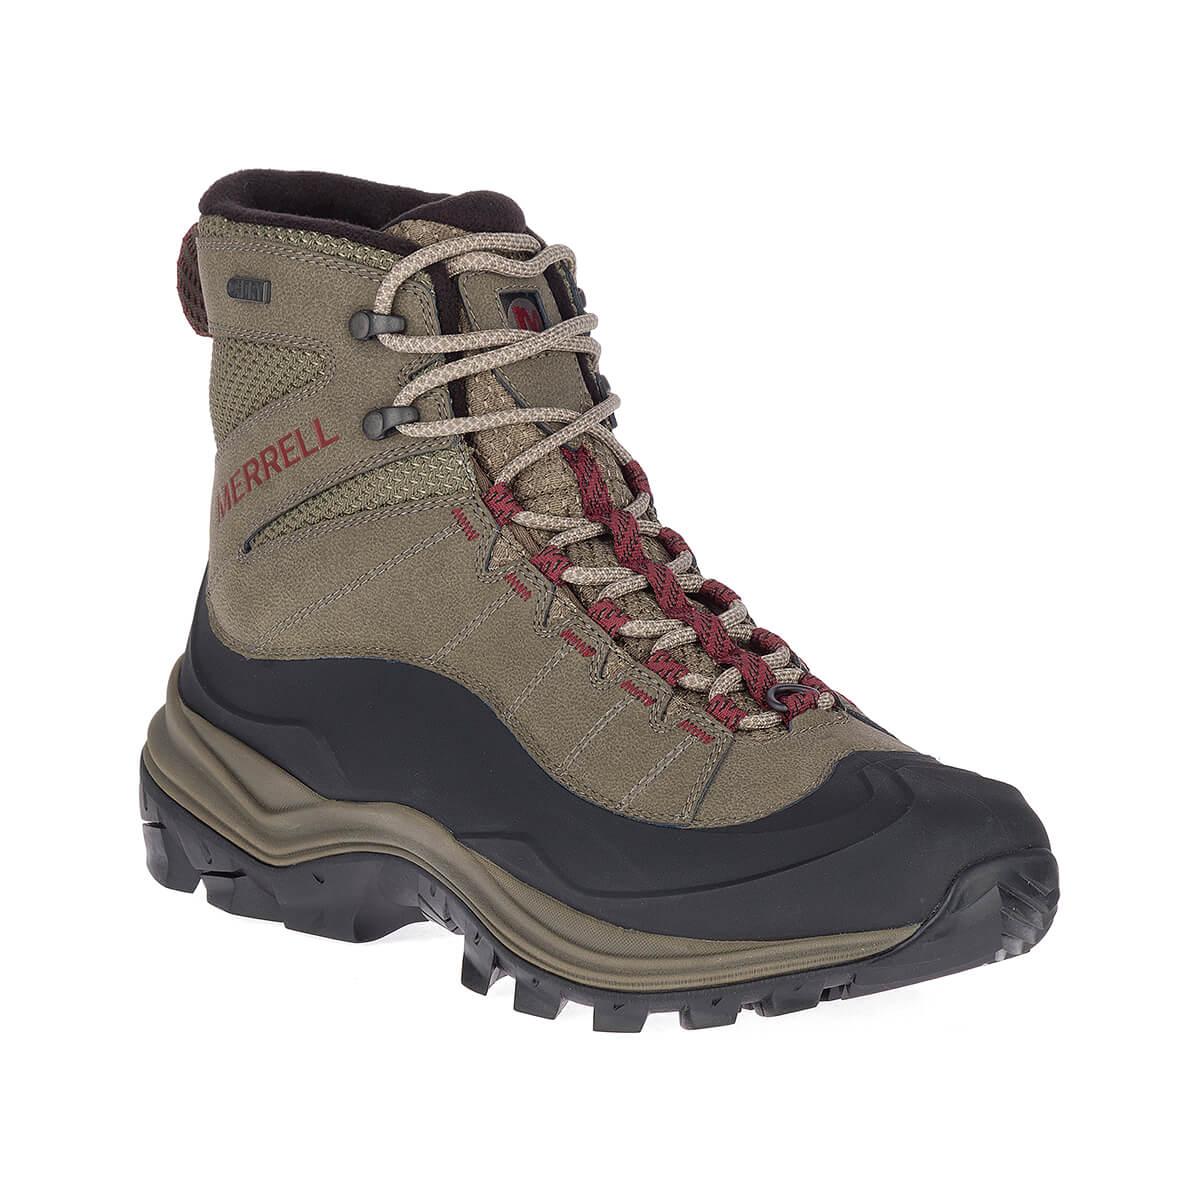 Men's Thermo Chill Mid Shell Waterproof